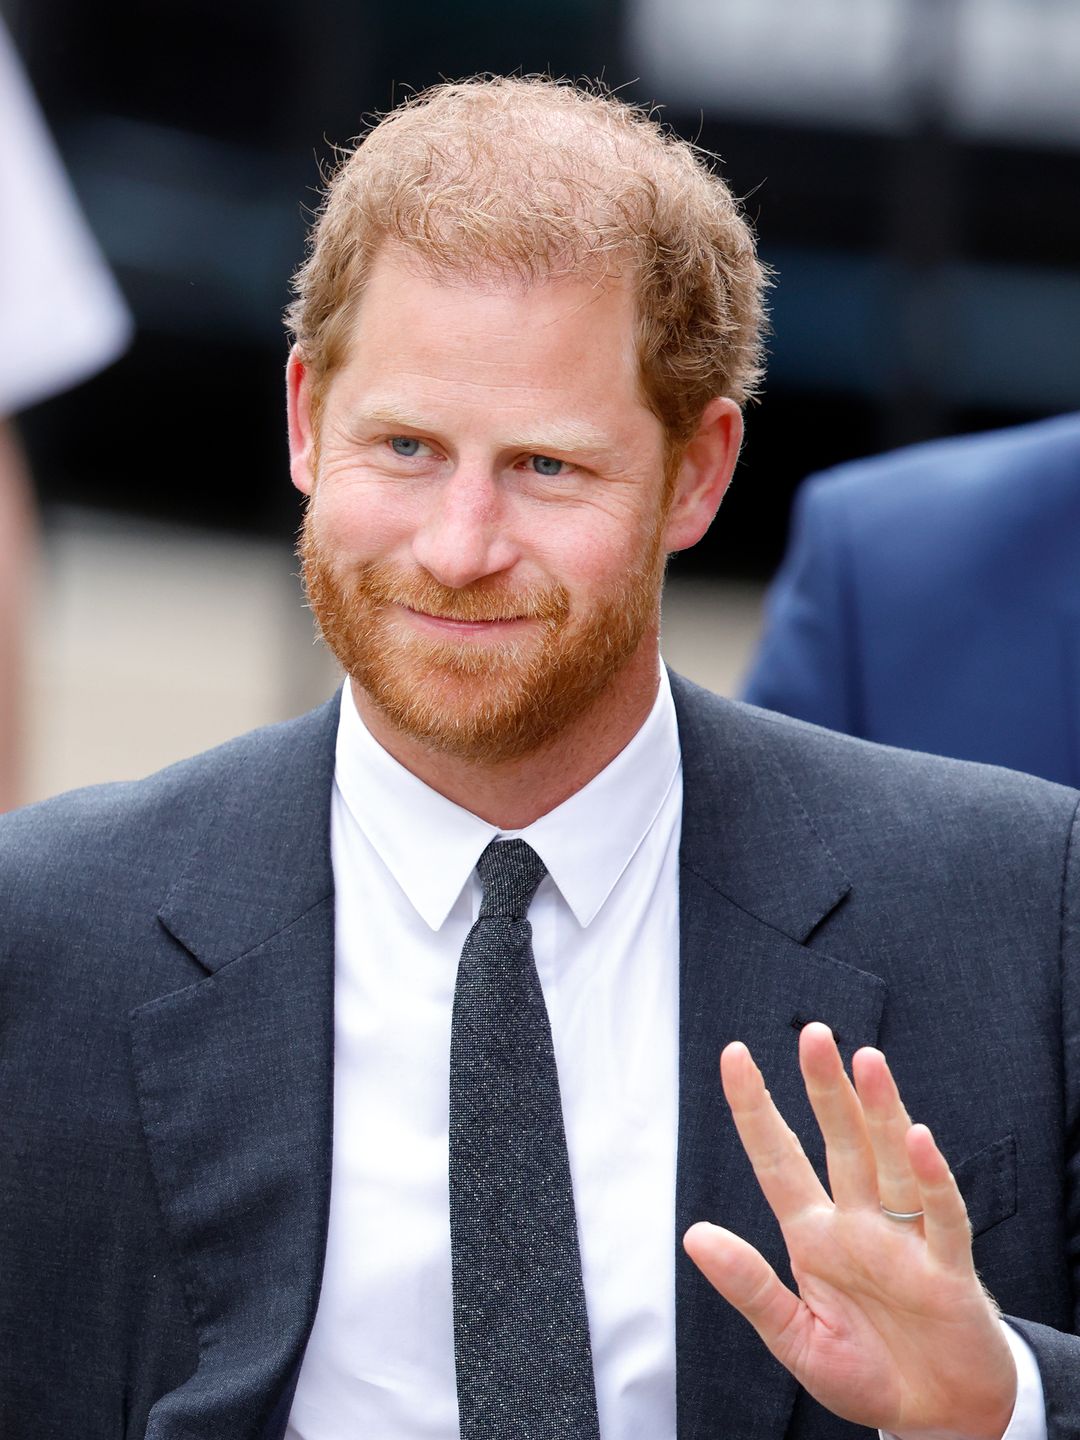 Prince Harry smiling and waving